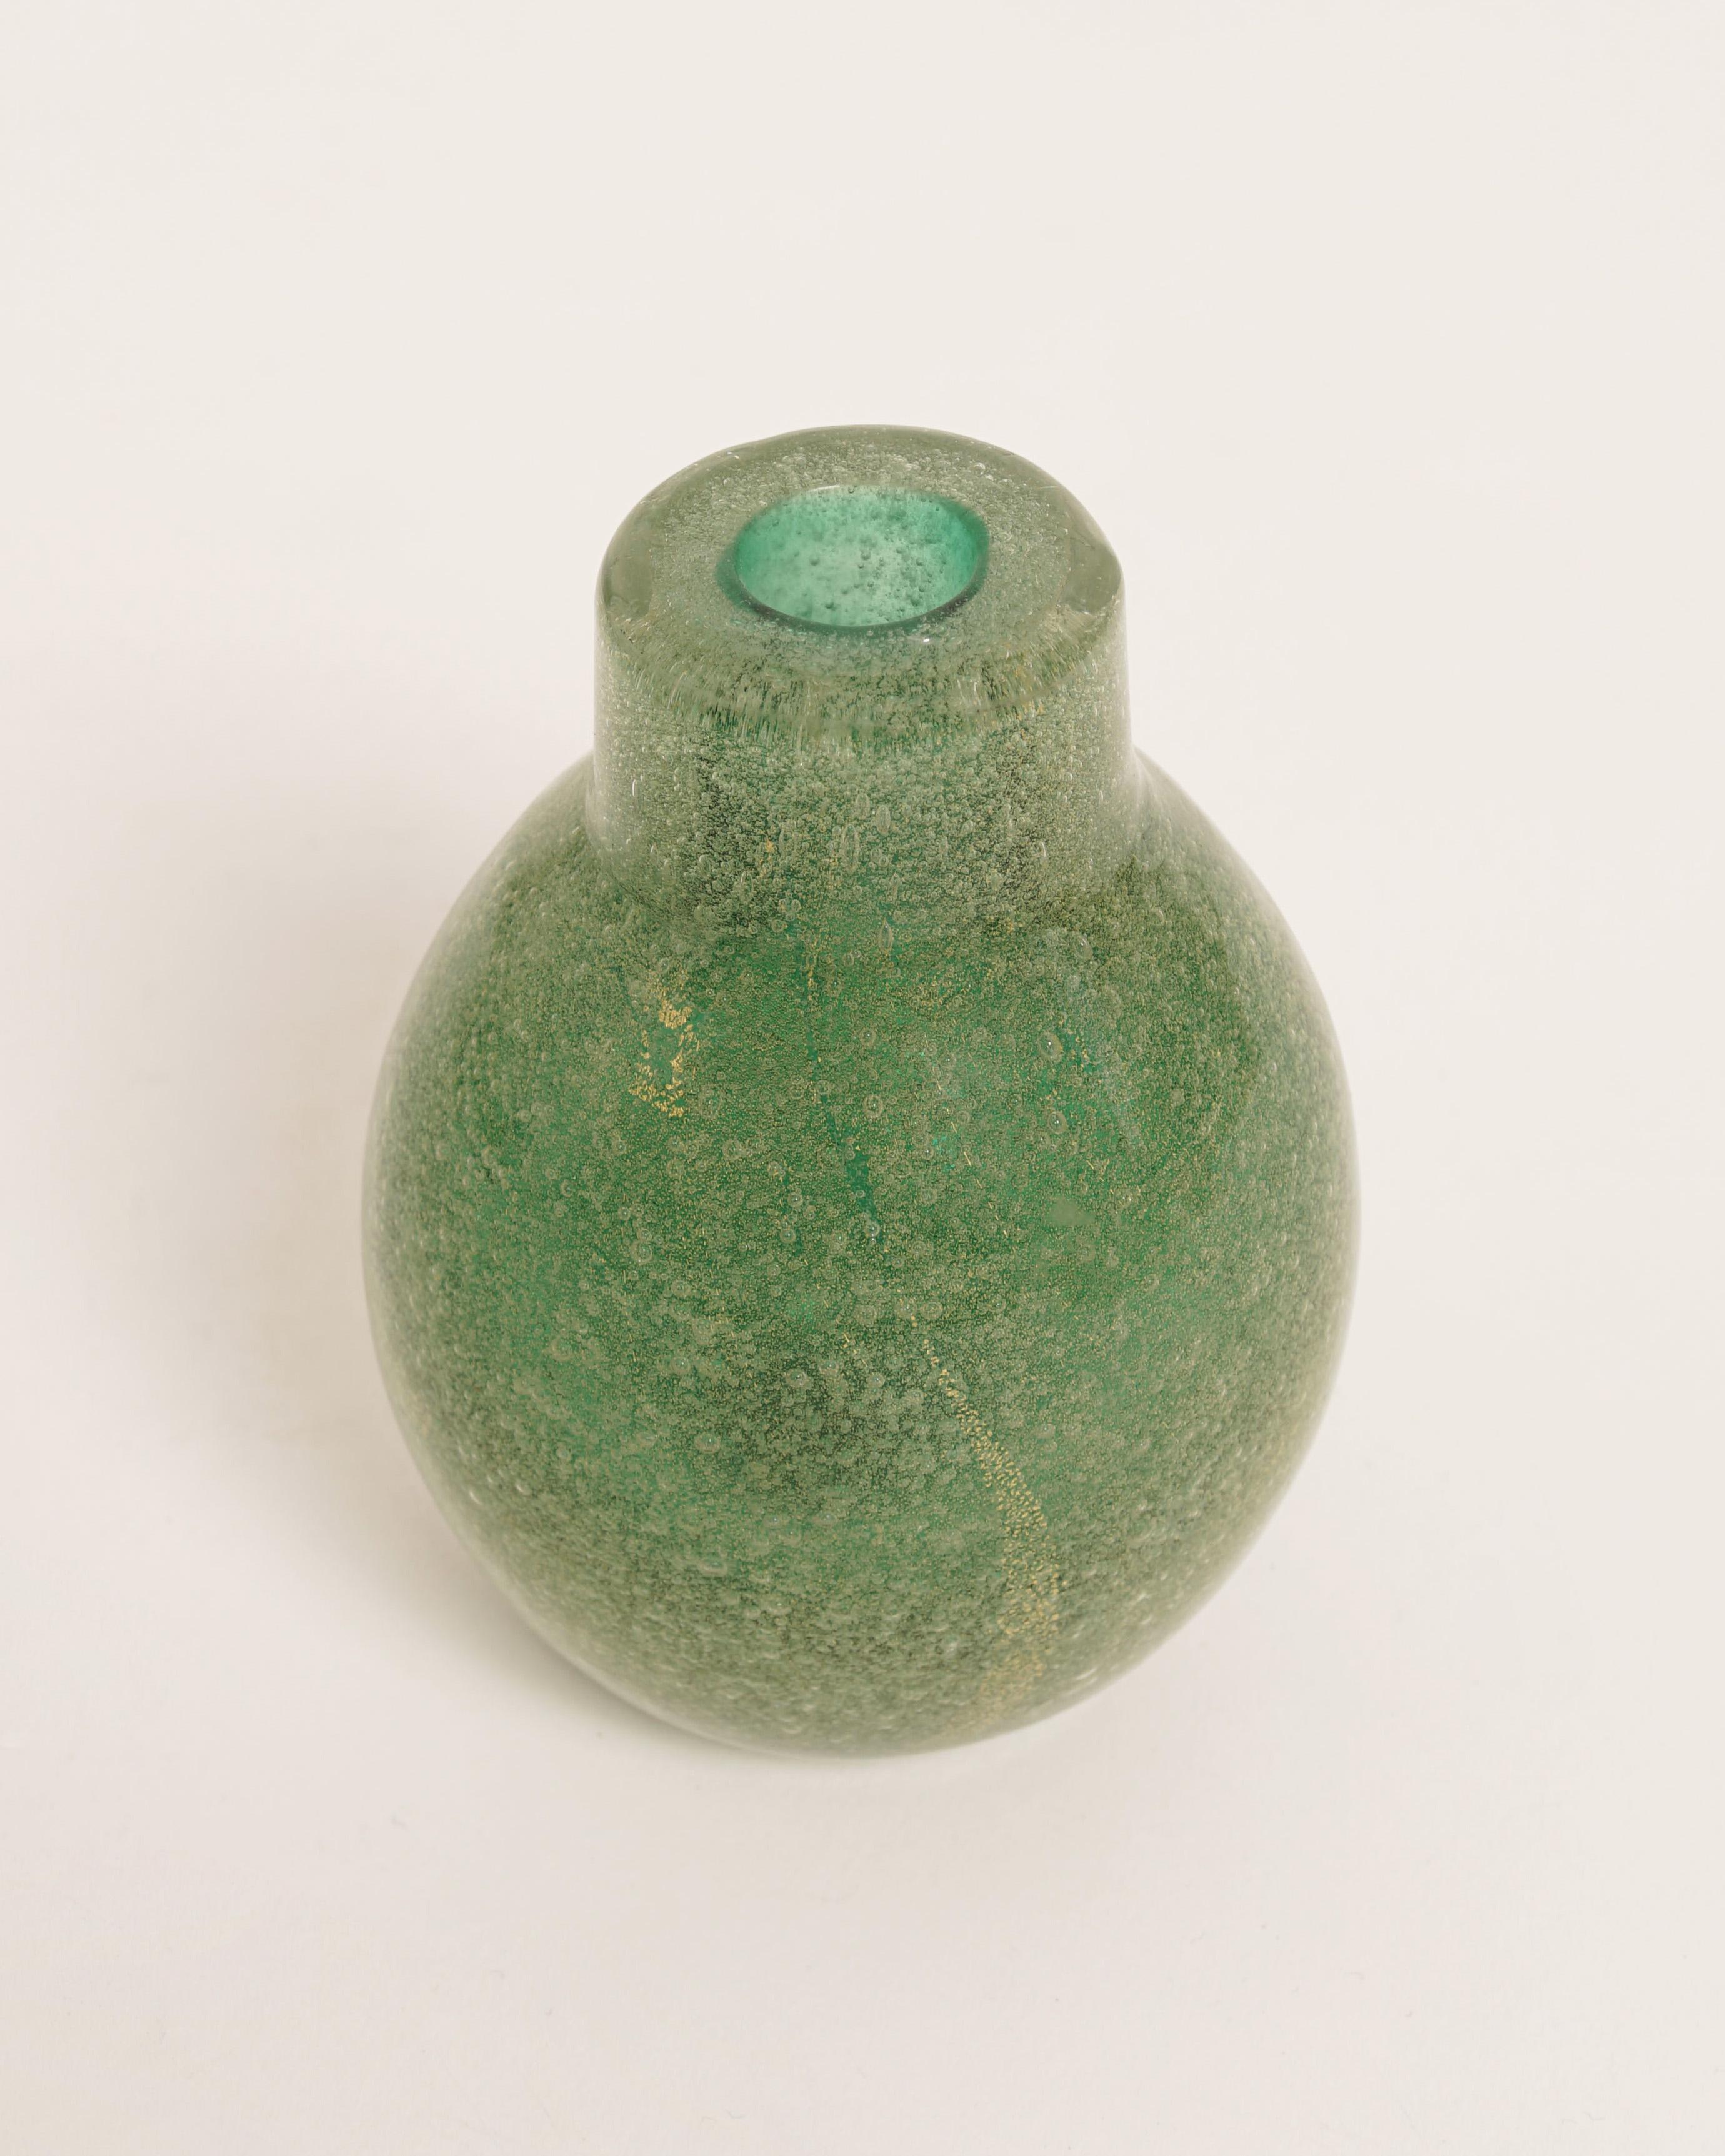 Carlo Scarpa
 'Sommerso a bolicine' Vase, c. 1935
Execution: Venini & C. Cased glass, clear, green and gold.
Signed: Venini murano (acid stamp).
H : 11 cm (4.3